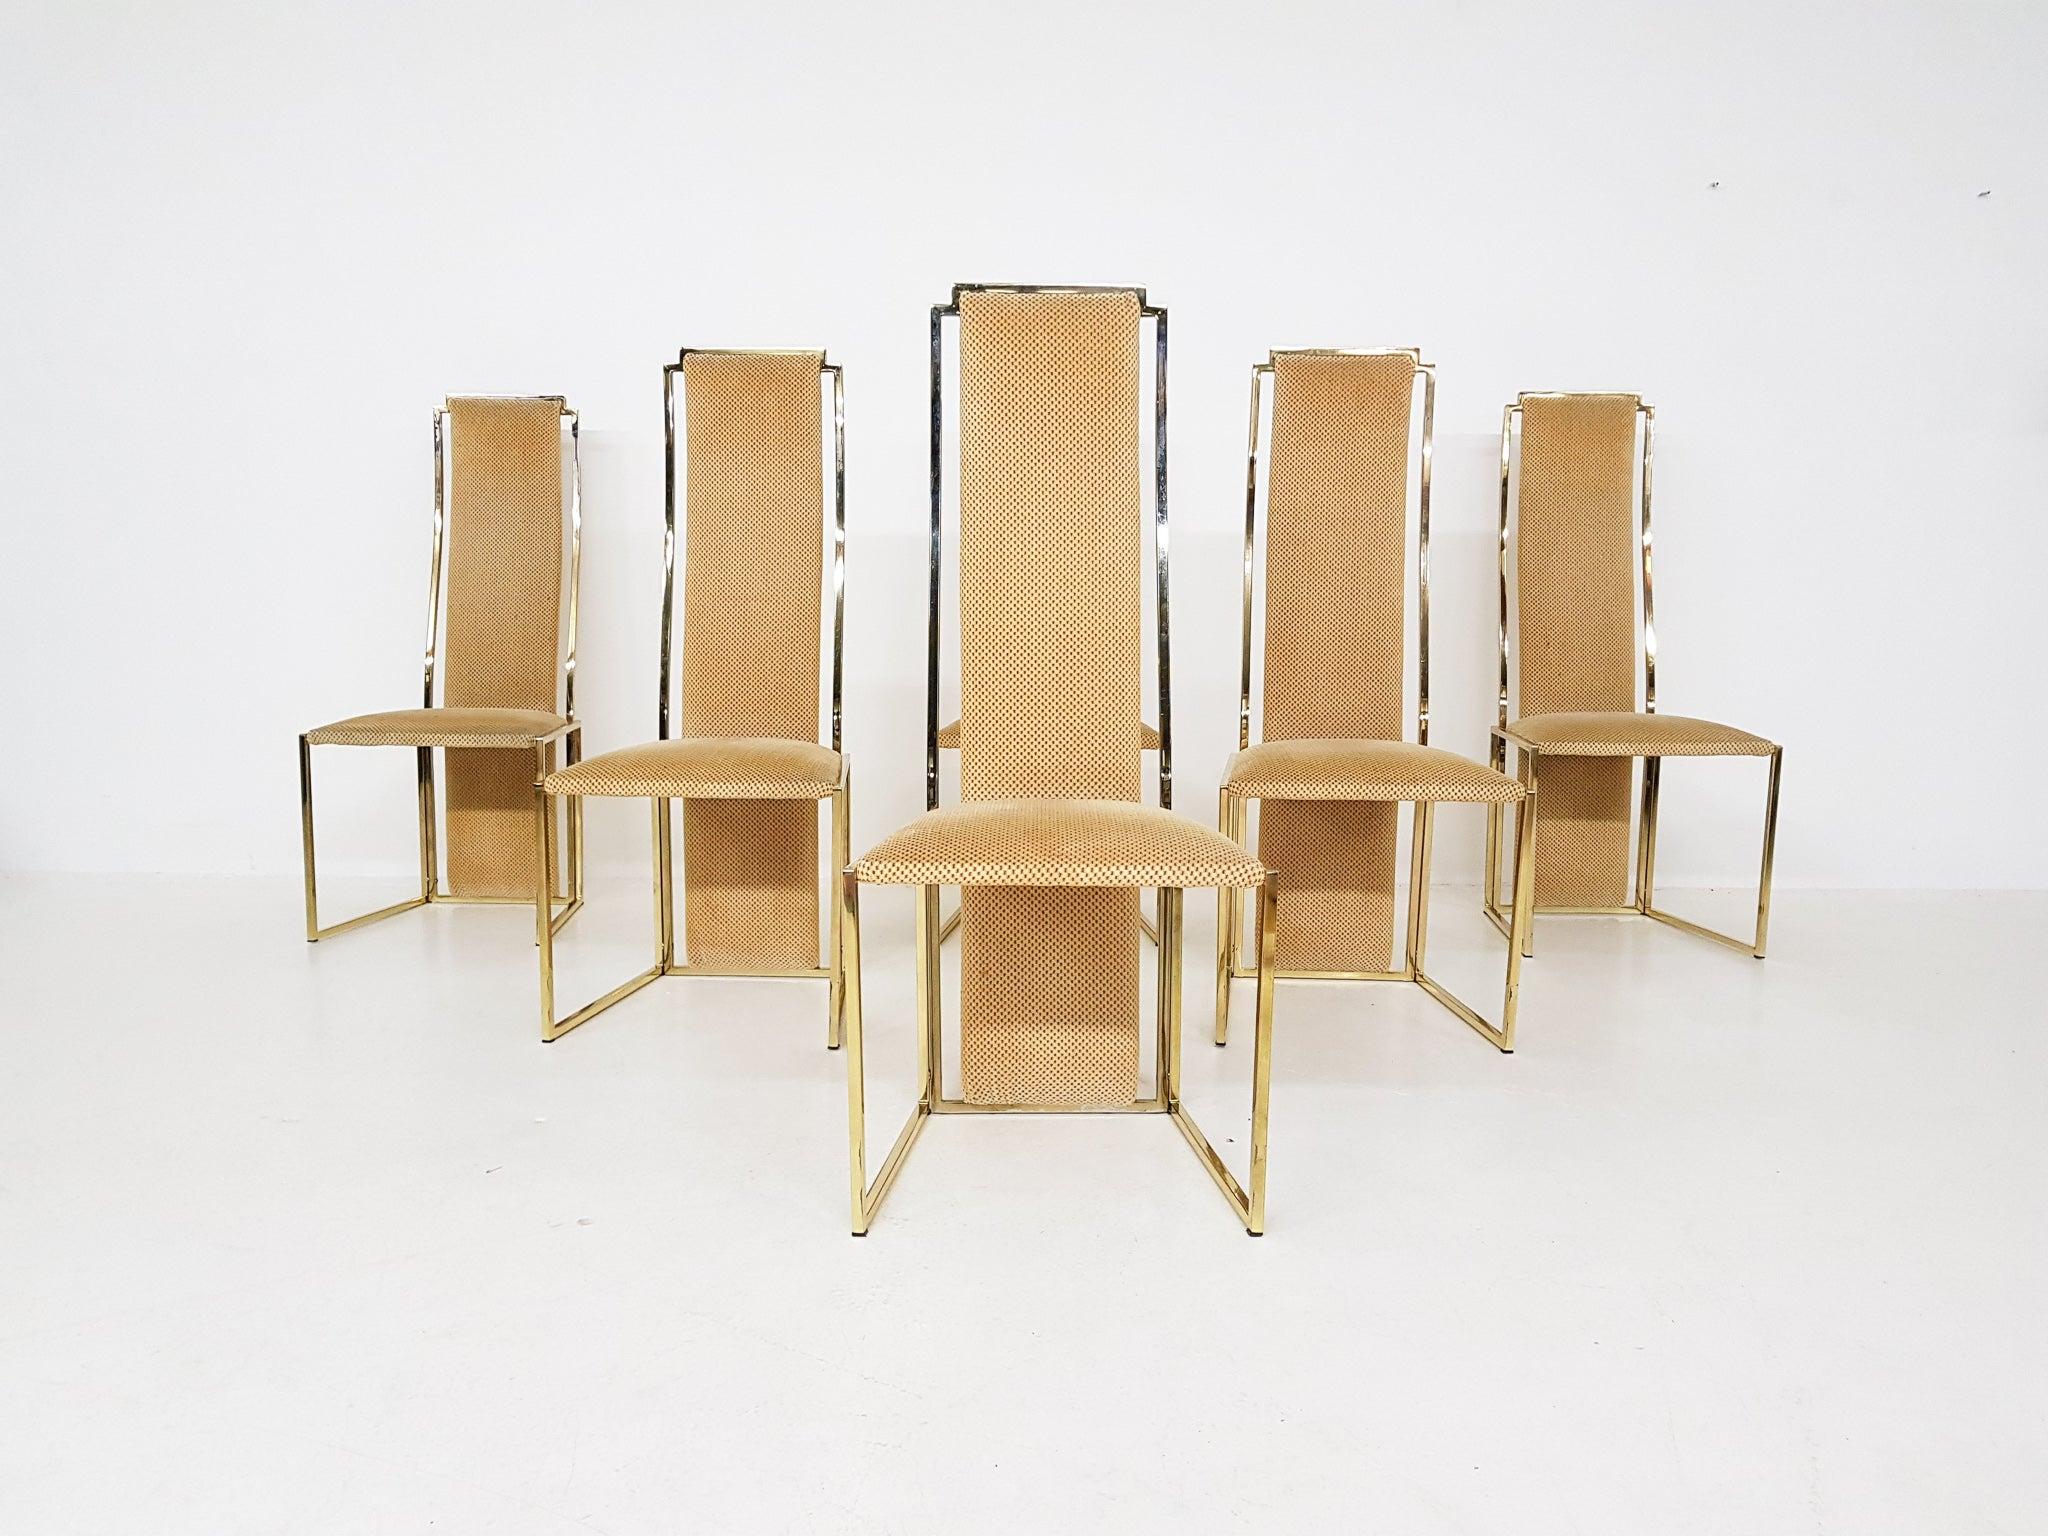 High-end gold-plated metal high back dining chairs by Alain Delon. Made and designed in France in the 1980s.

A set of six dining chairs made of gold plated metal and fabric. The chairs have fantastic geometric shapes and look classic and yet very